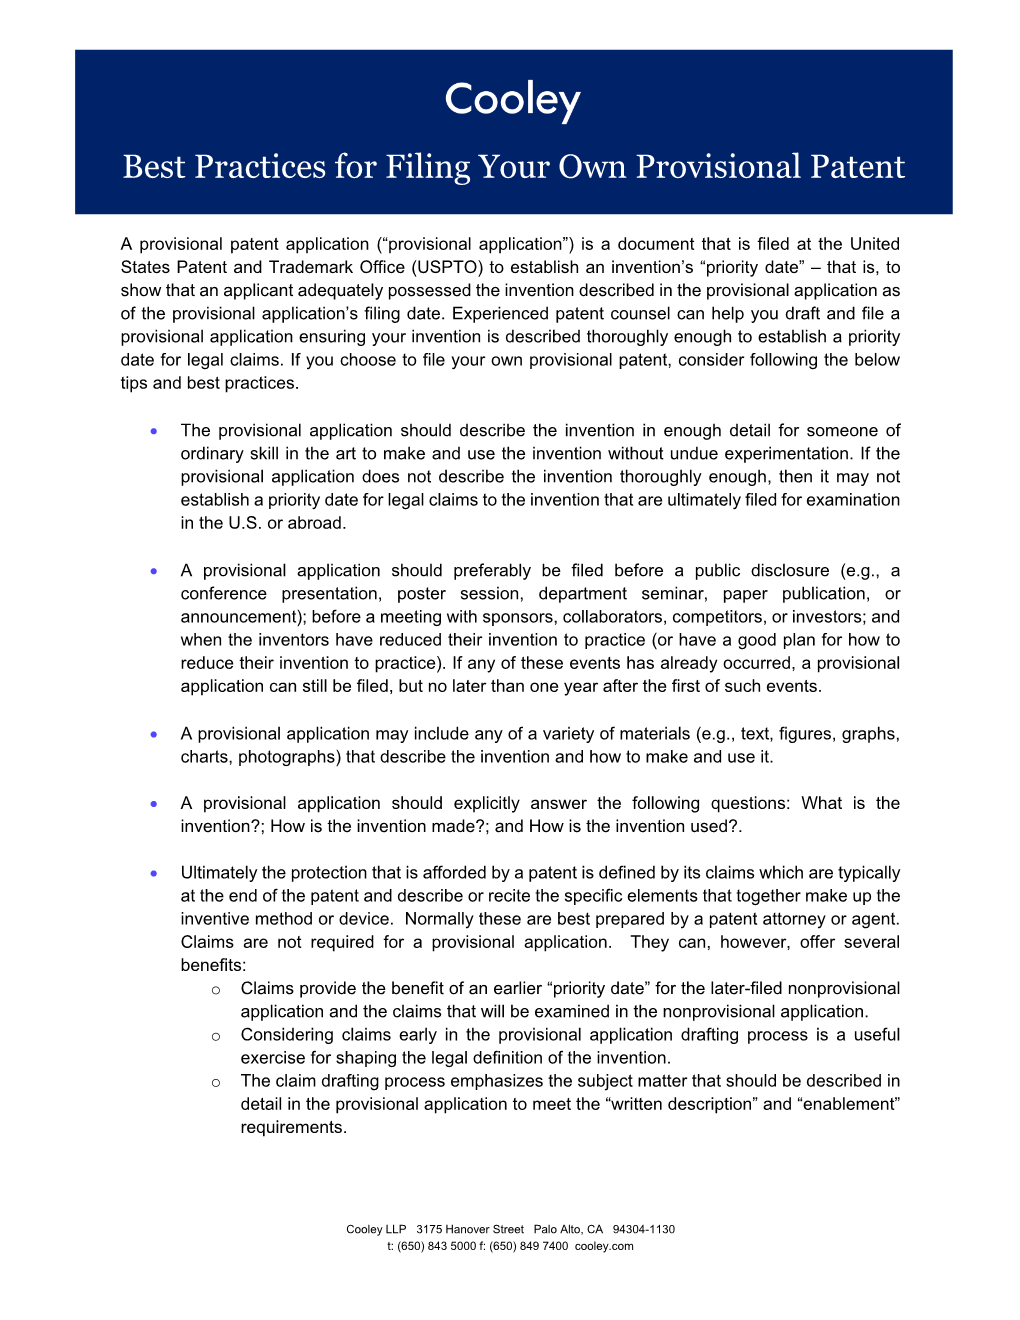 Best Practices for Filing Your Own Provisional Patent